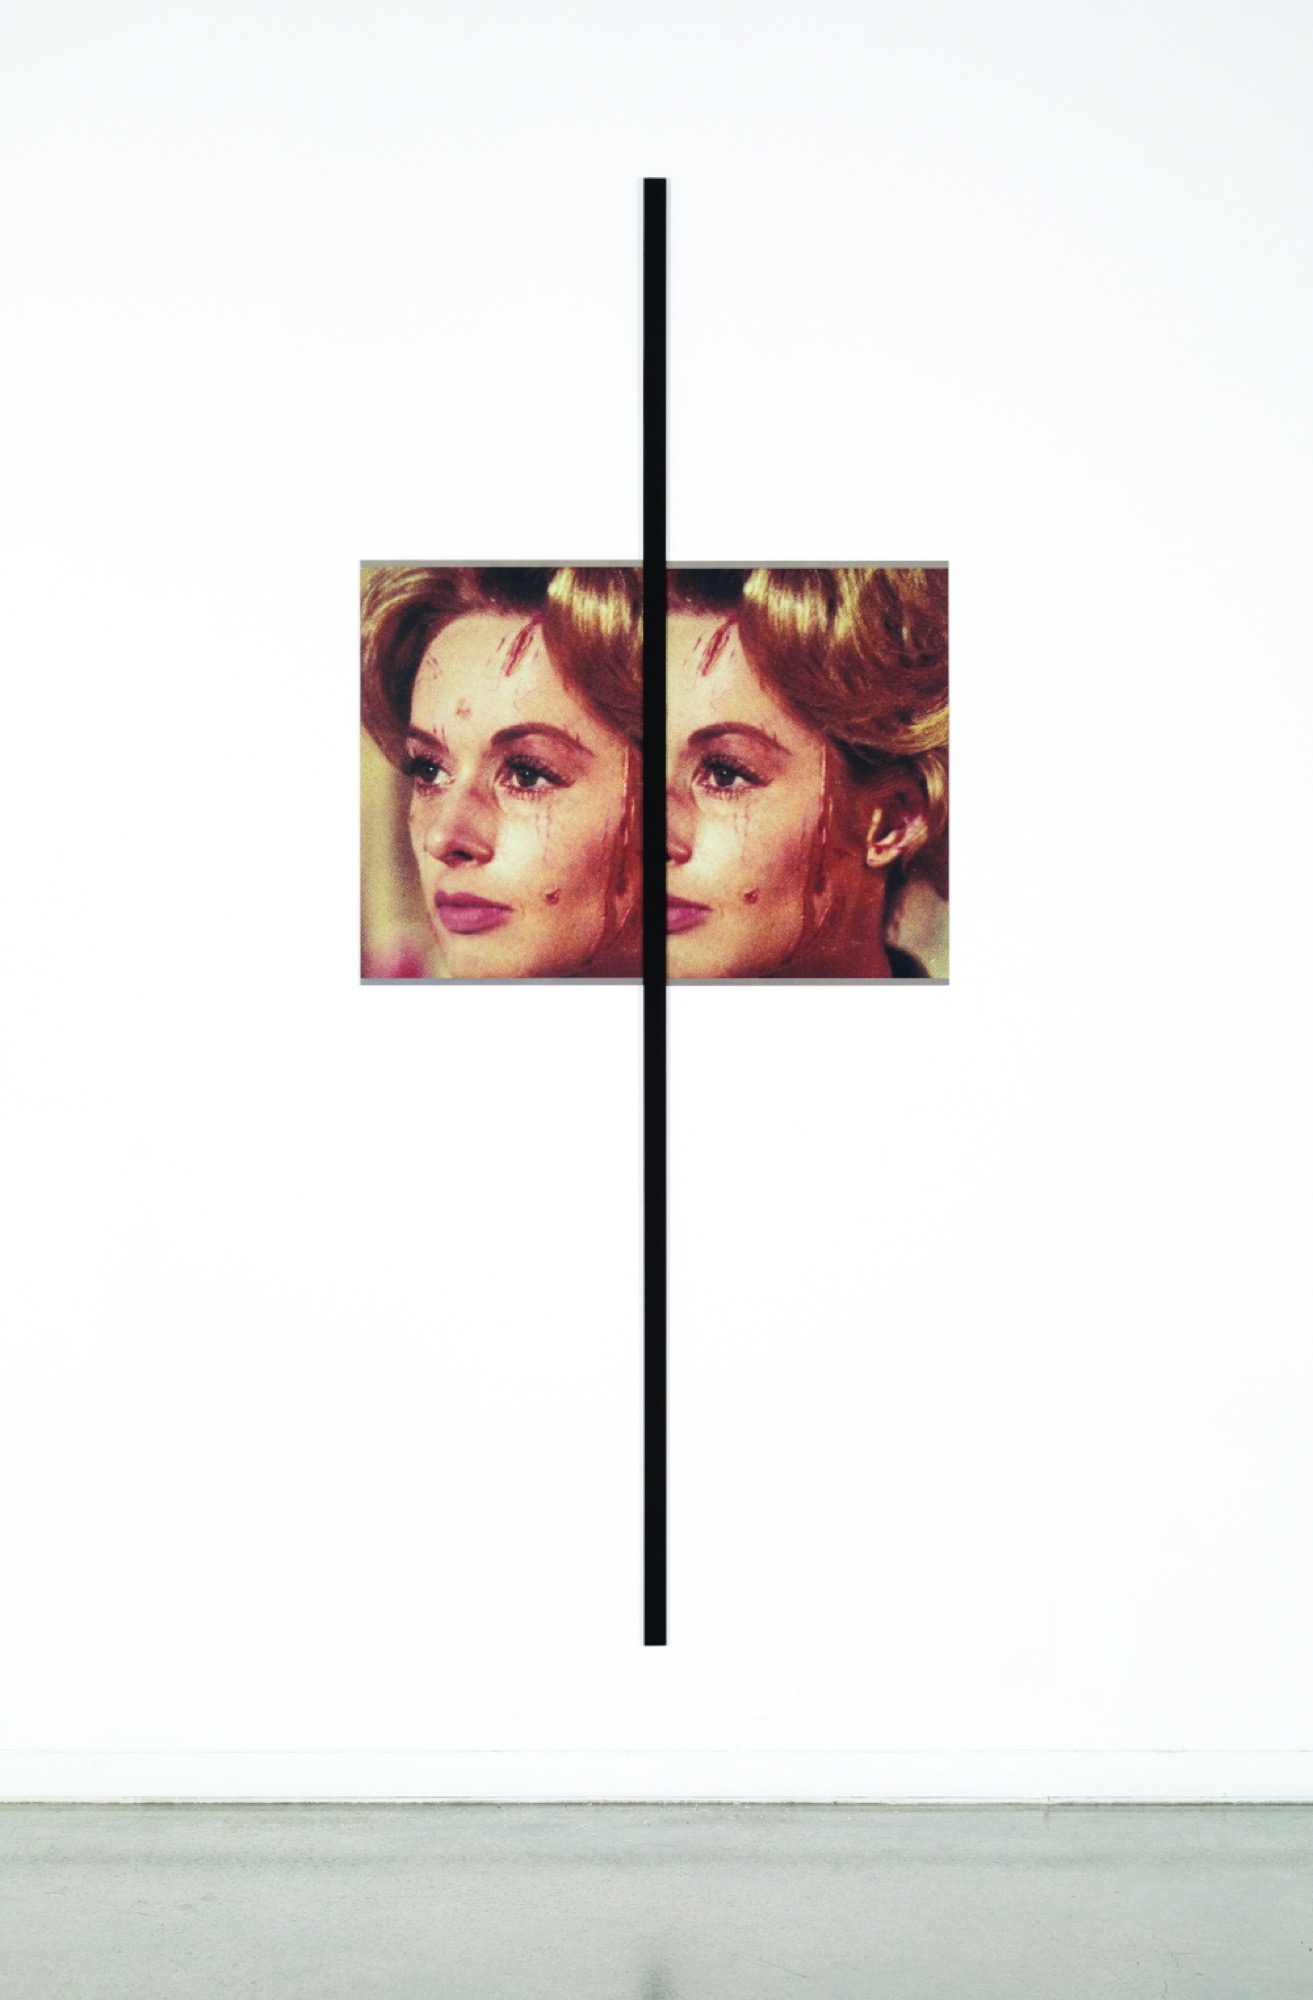 Janet Burchill and Jennifer McCamley, <em>Temptation to Exist (Tippi)</em>,1986, 2 C-type photographs mounted onto aluminium, each 76 x 50.5 cm, synthetic polymer paint on wood, 262 x 4 x 1.3 cm. Collection of Ruth Bain and Stieg Persson.